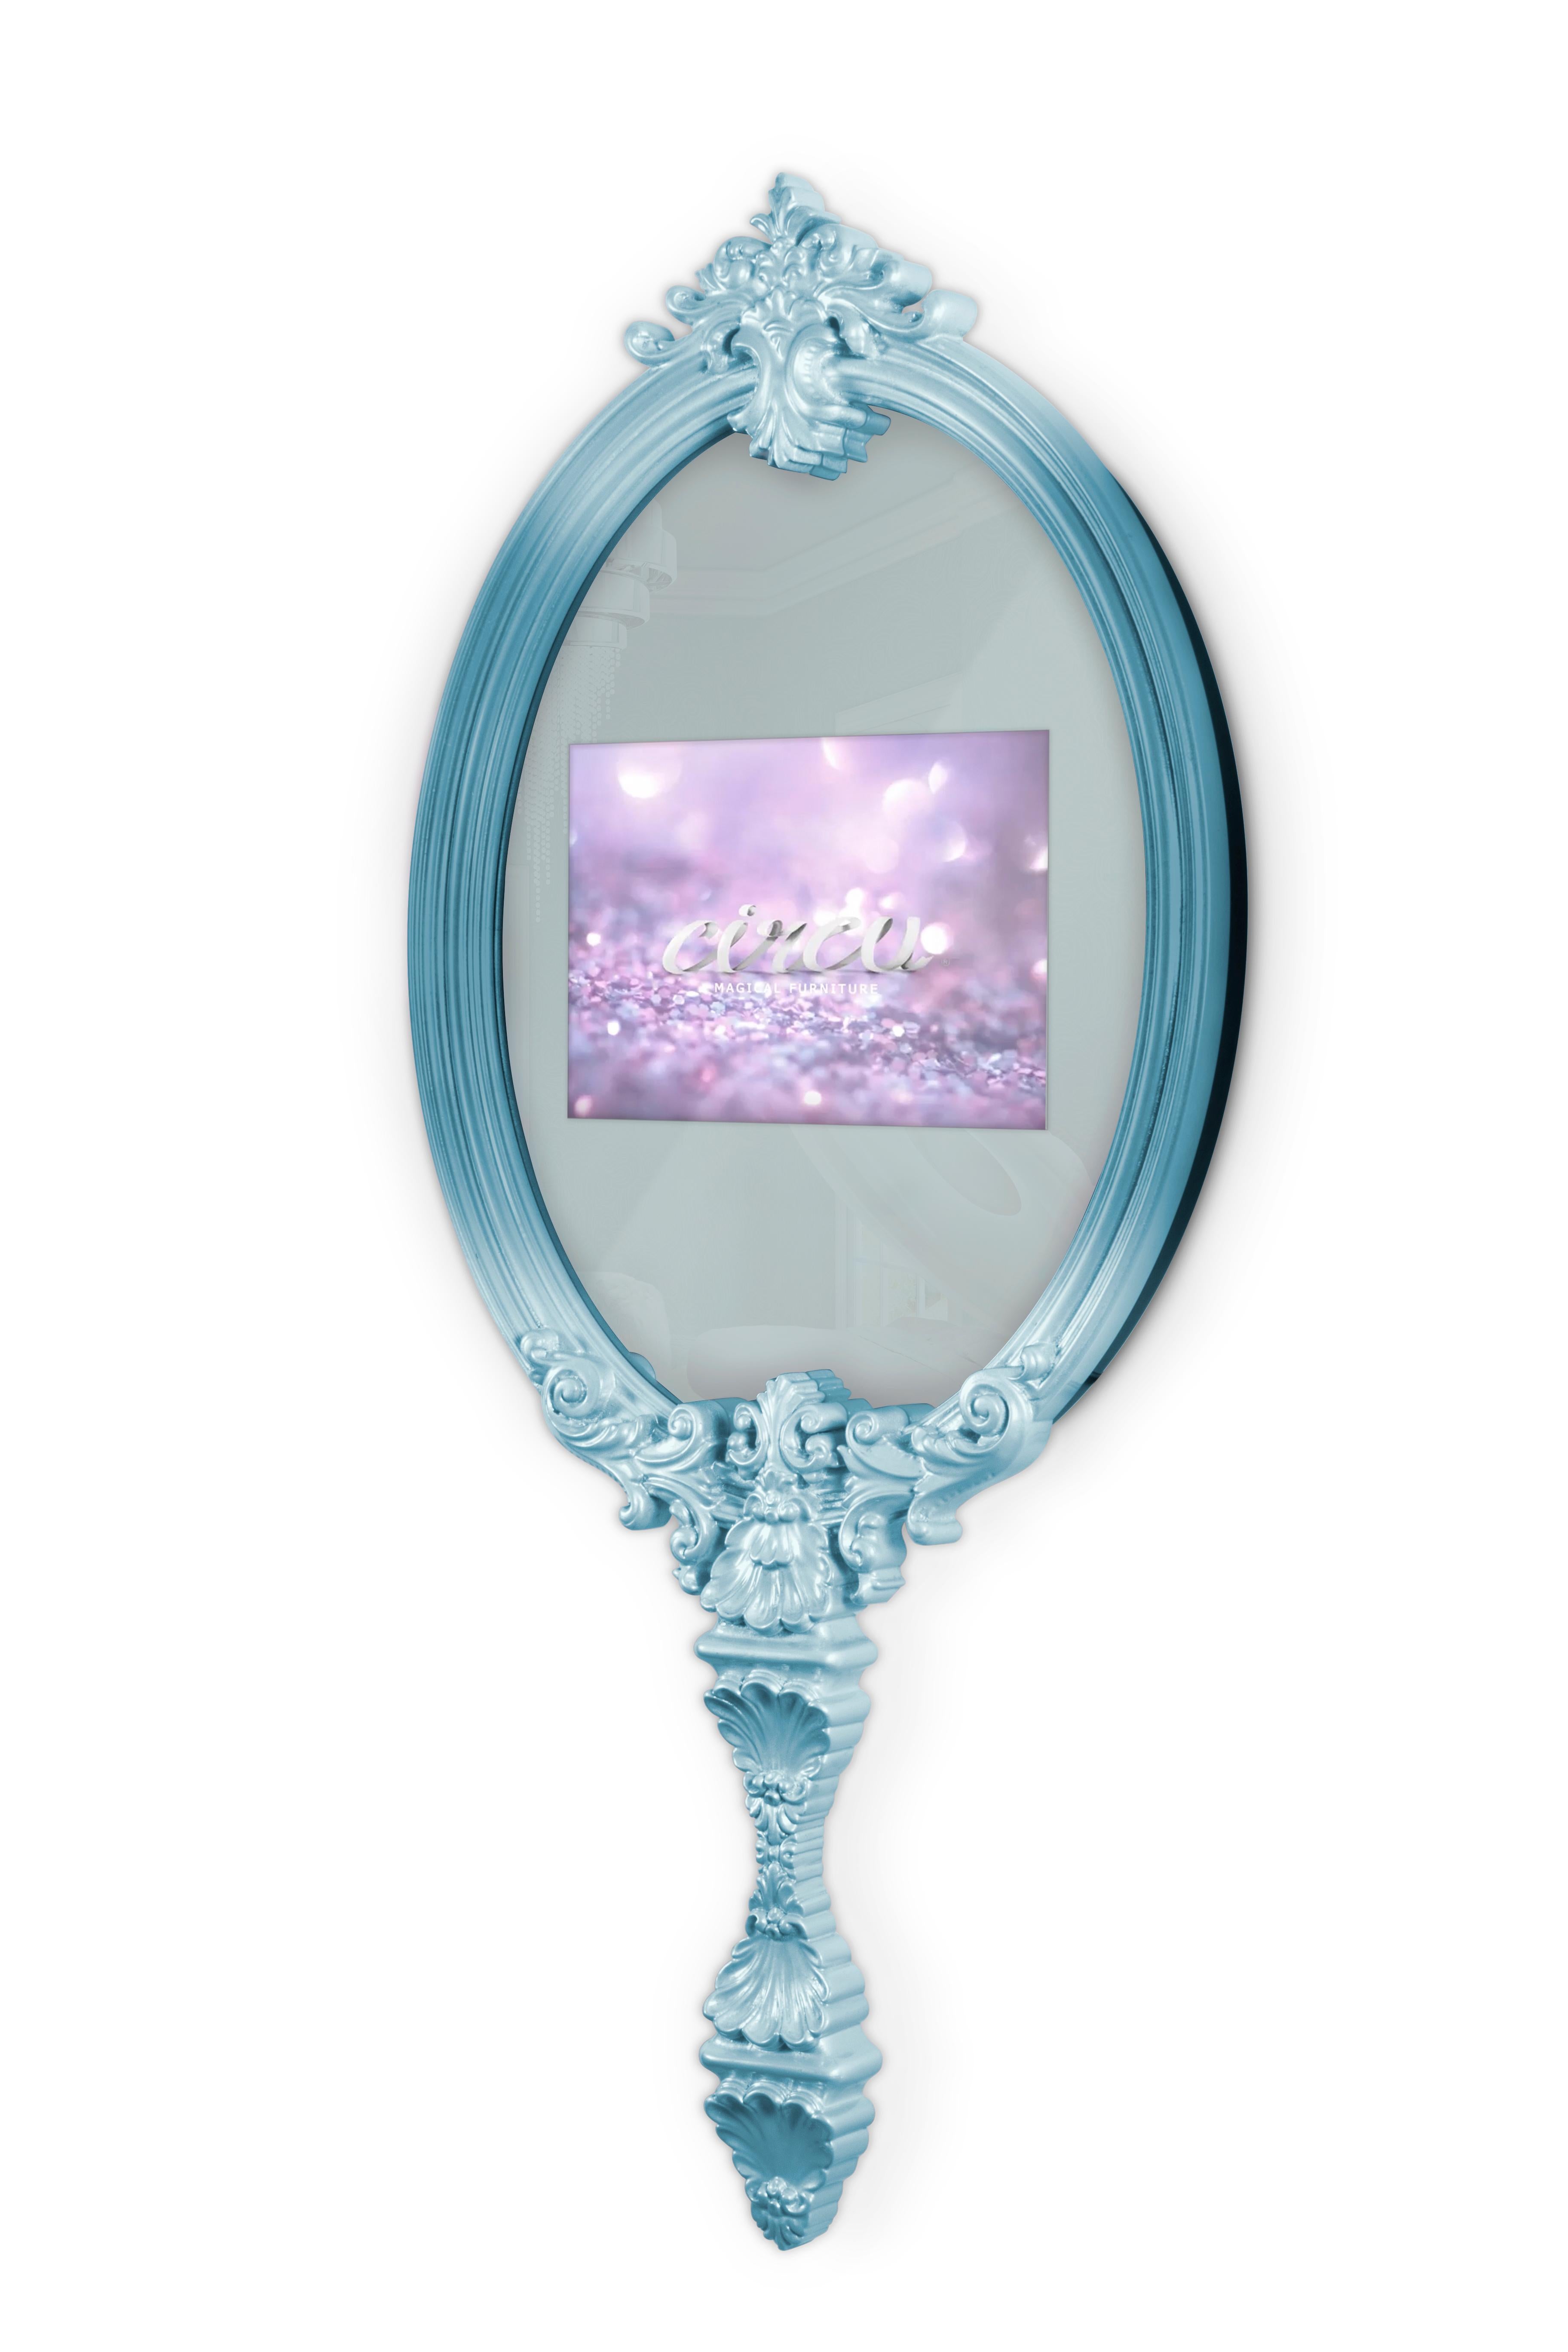 Magical Kids Wall Mirror in Blue featuring a TV by Circu Magical Furniture

Inspired by the mirror of the wicked witch of snow-white, this kids’ mirror is also magical! 